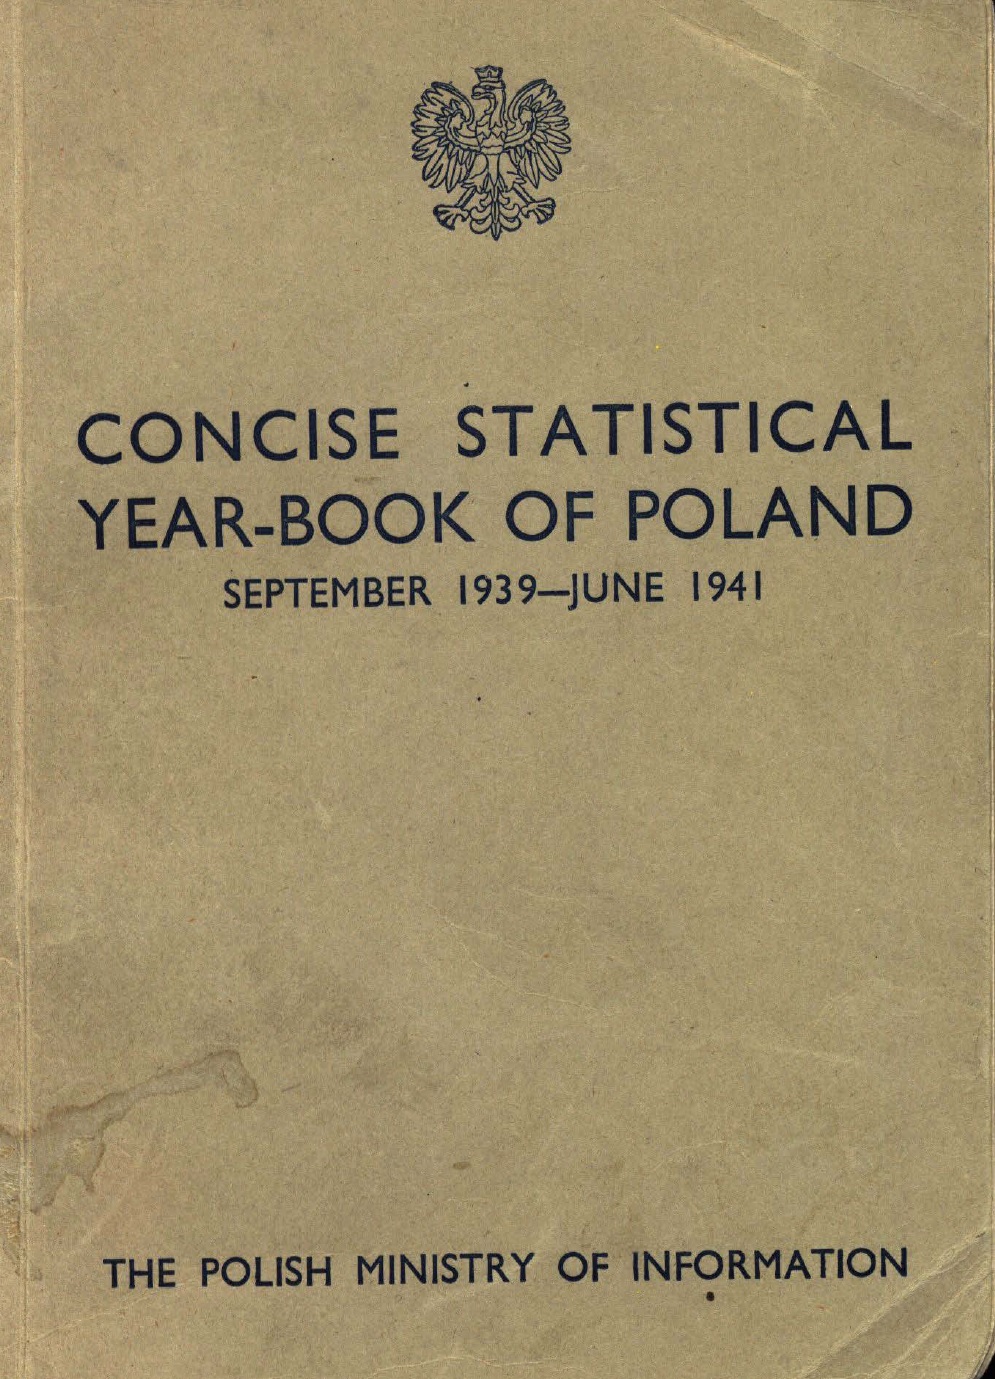 Concise Statistical Year-Book of Poland. September 1939 – June 1941 / [Ewa Estreicher-Grodzicka and Ludwik Grodzicki]. – [London] : Polish Ministry of Information, 1941